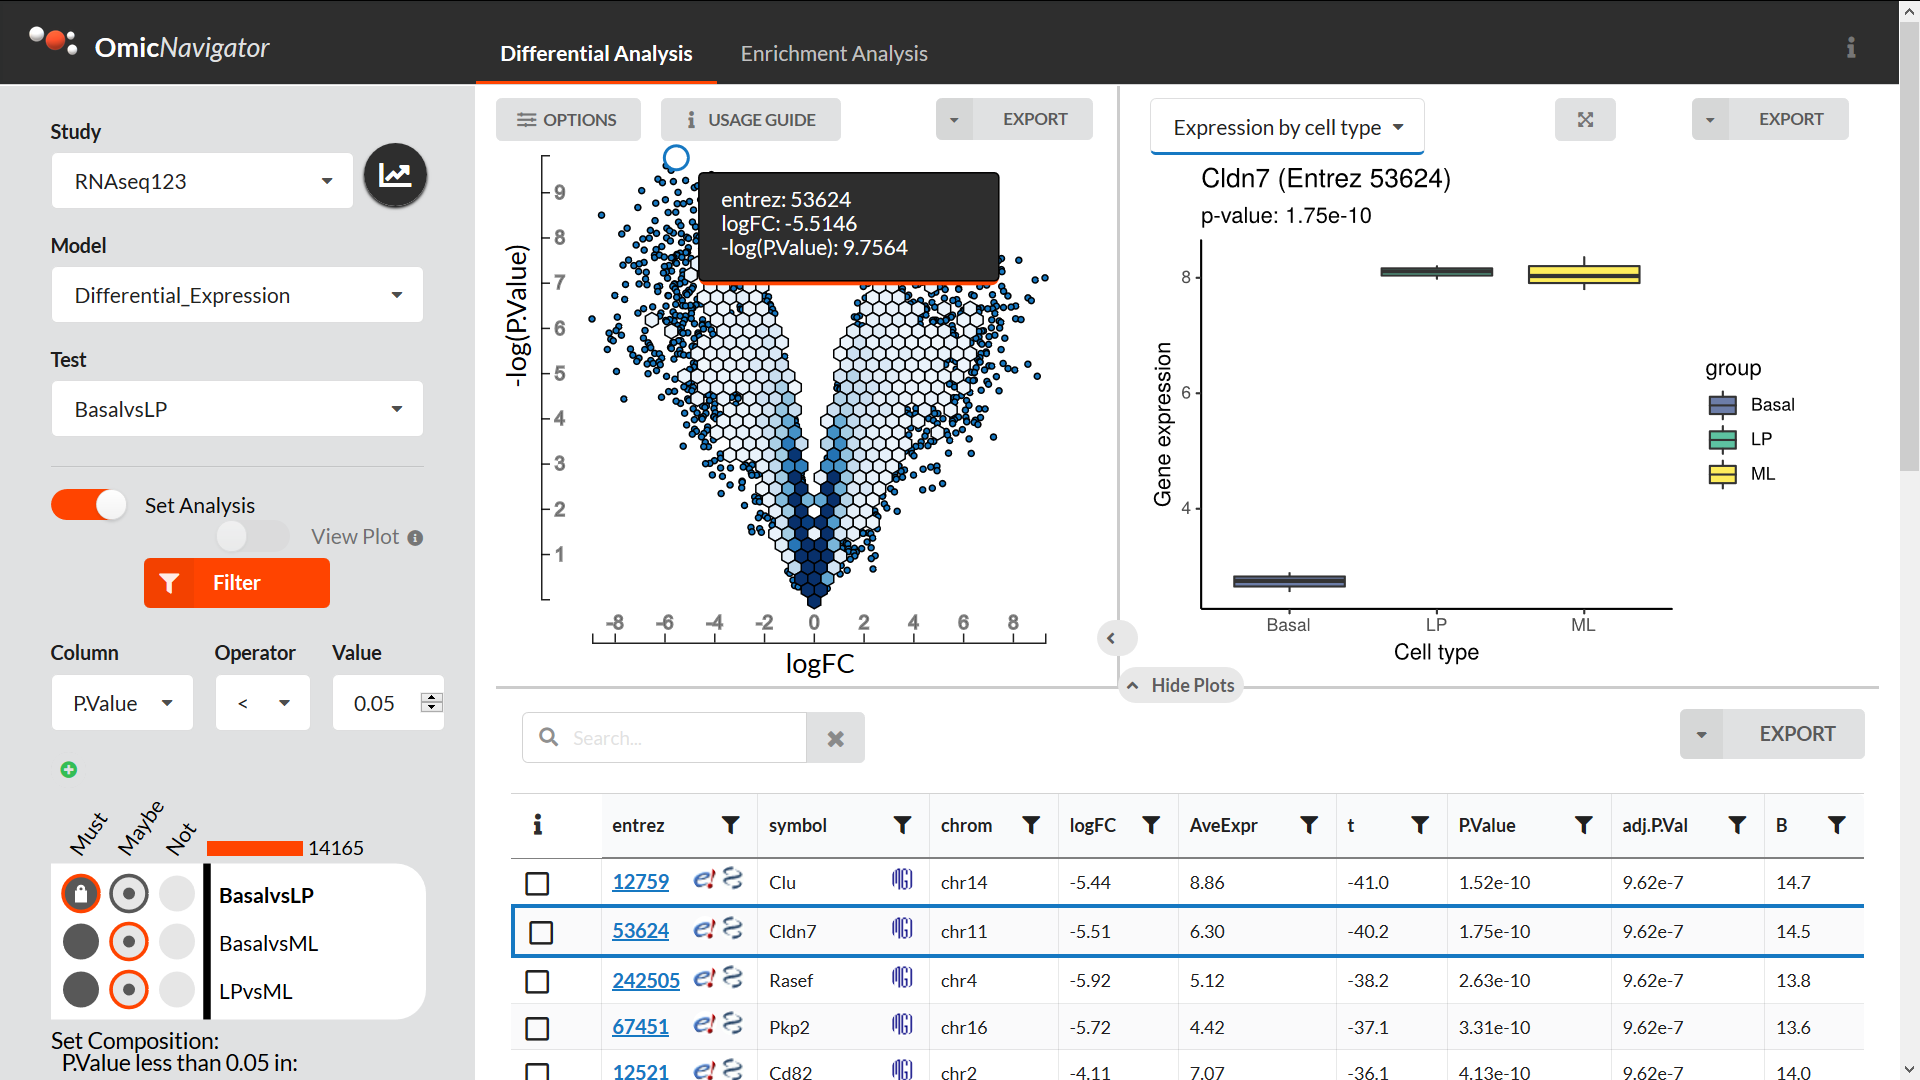 Screenshot of differential expression pane (R package version 1.8.0 and web app version 1.4.0)